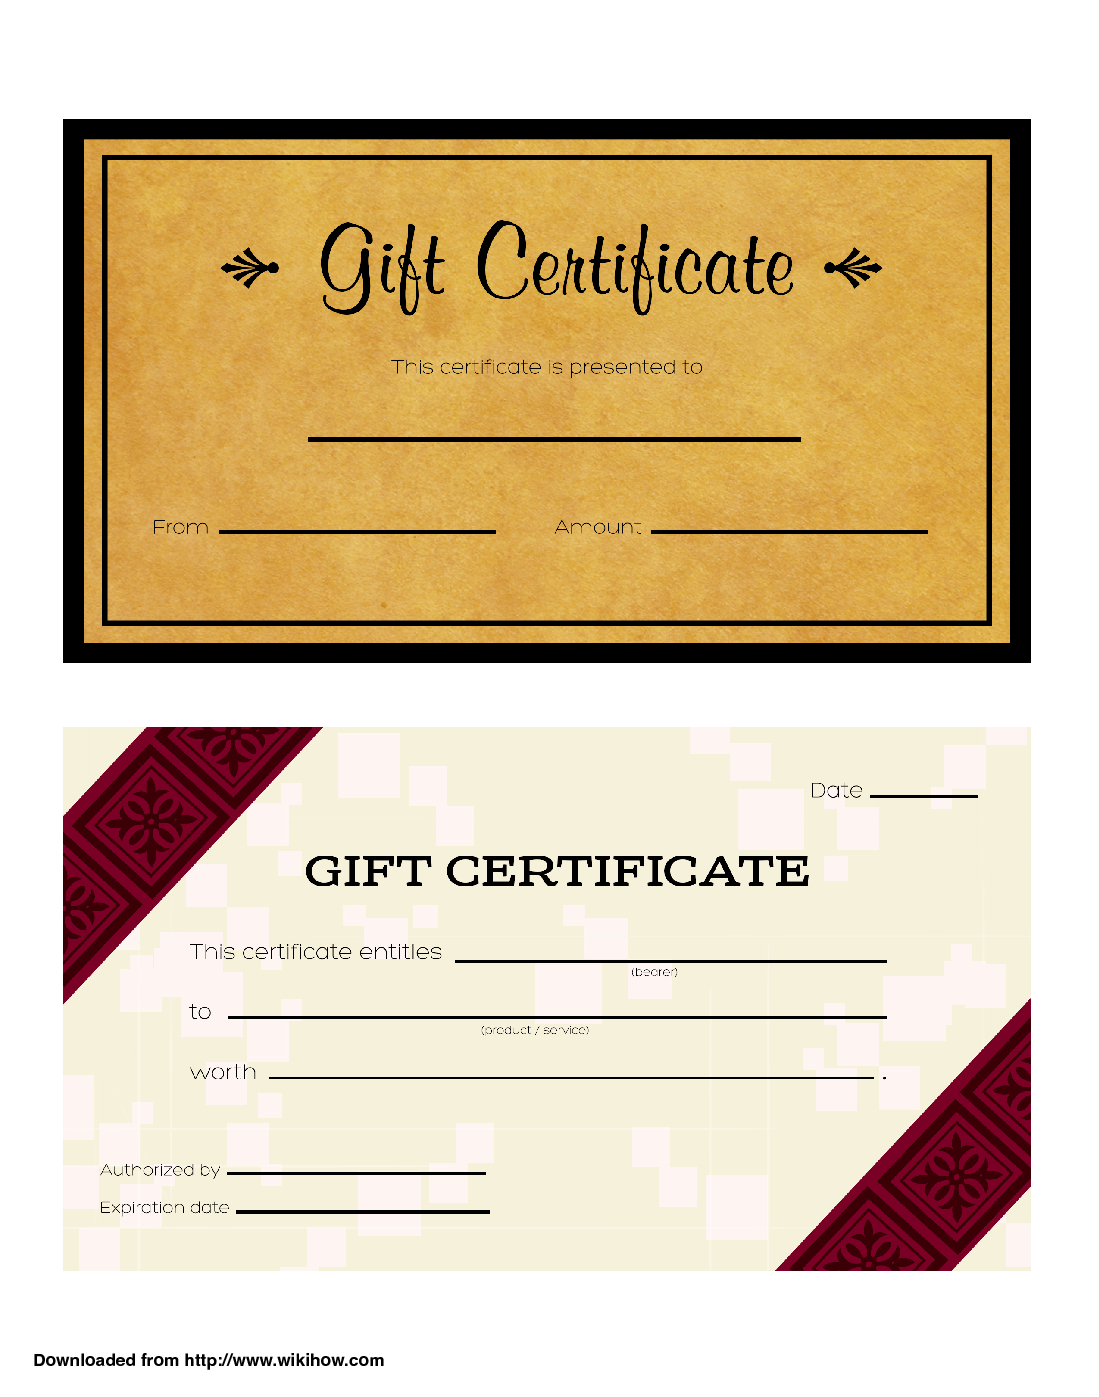 3 Ways To Make Your Own Printable Certificate – Wikihow Within Publisher Gift Certificate Template